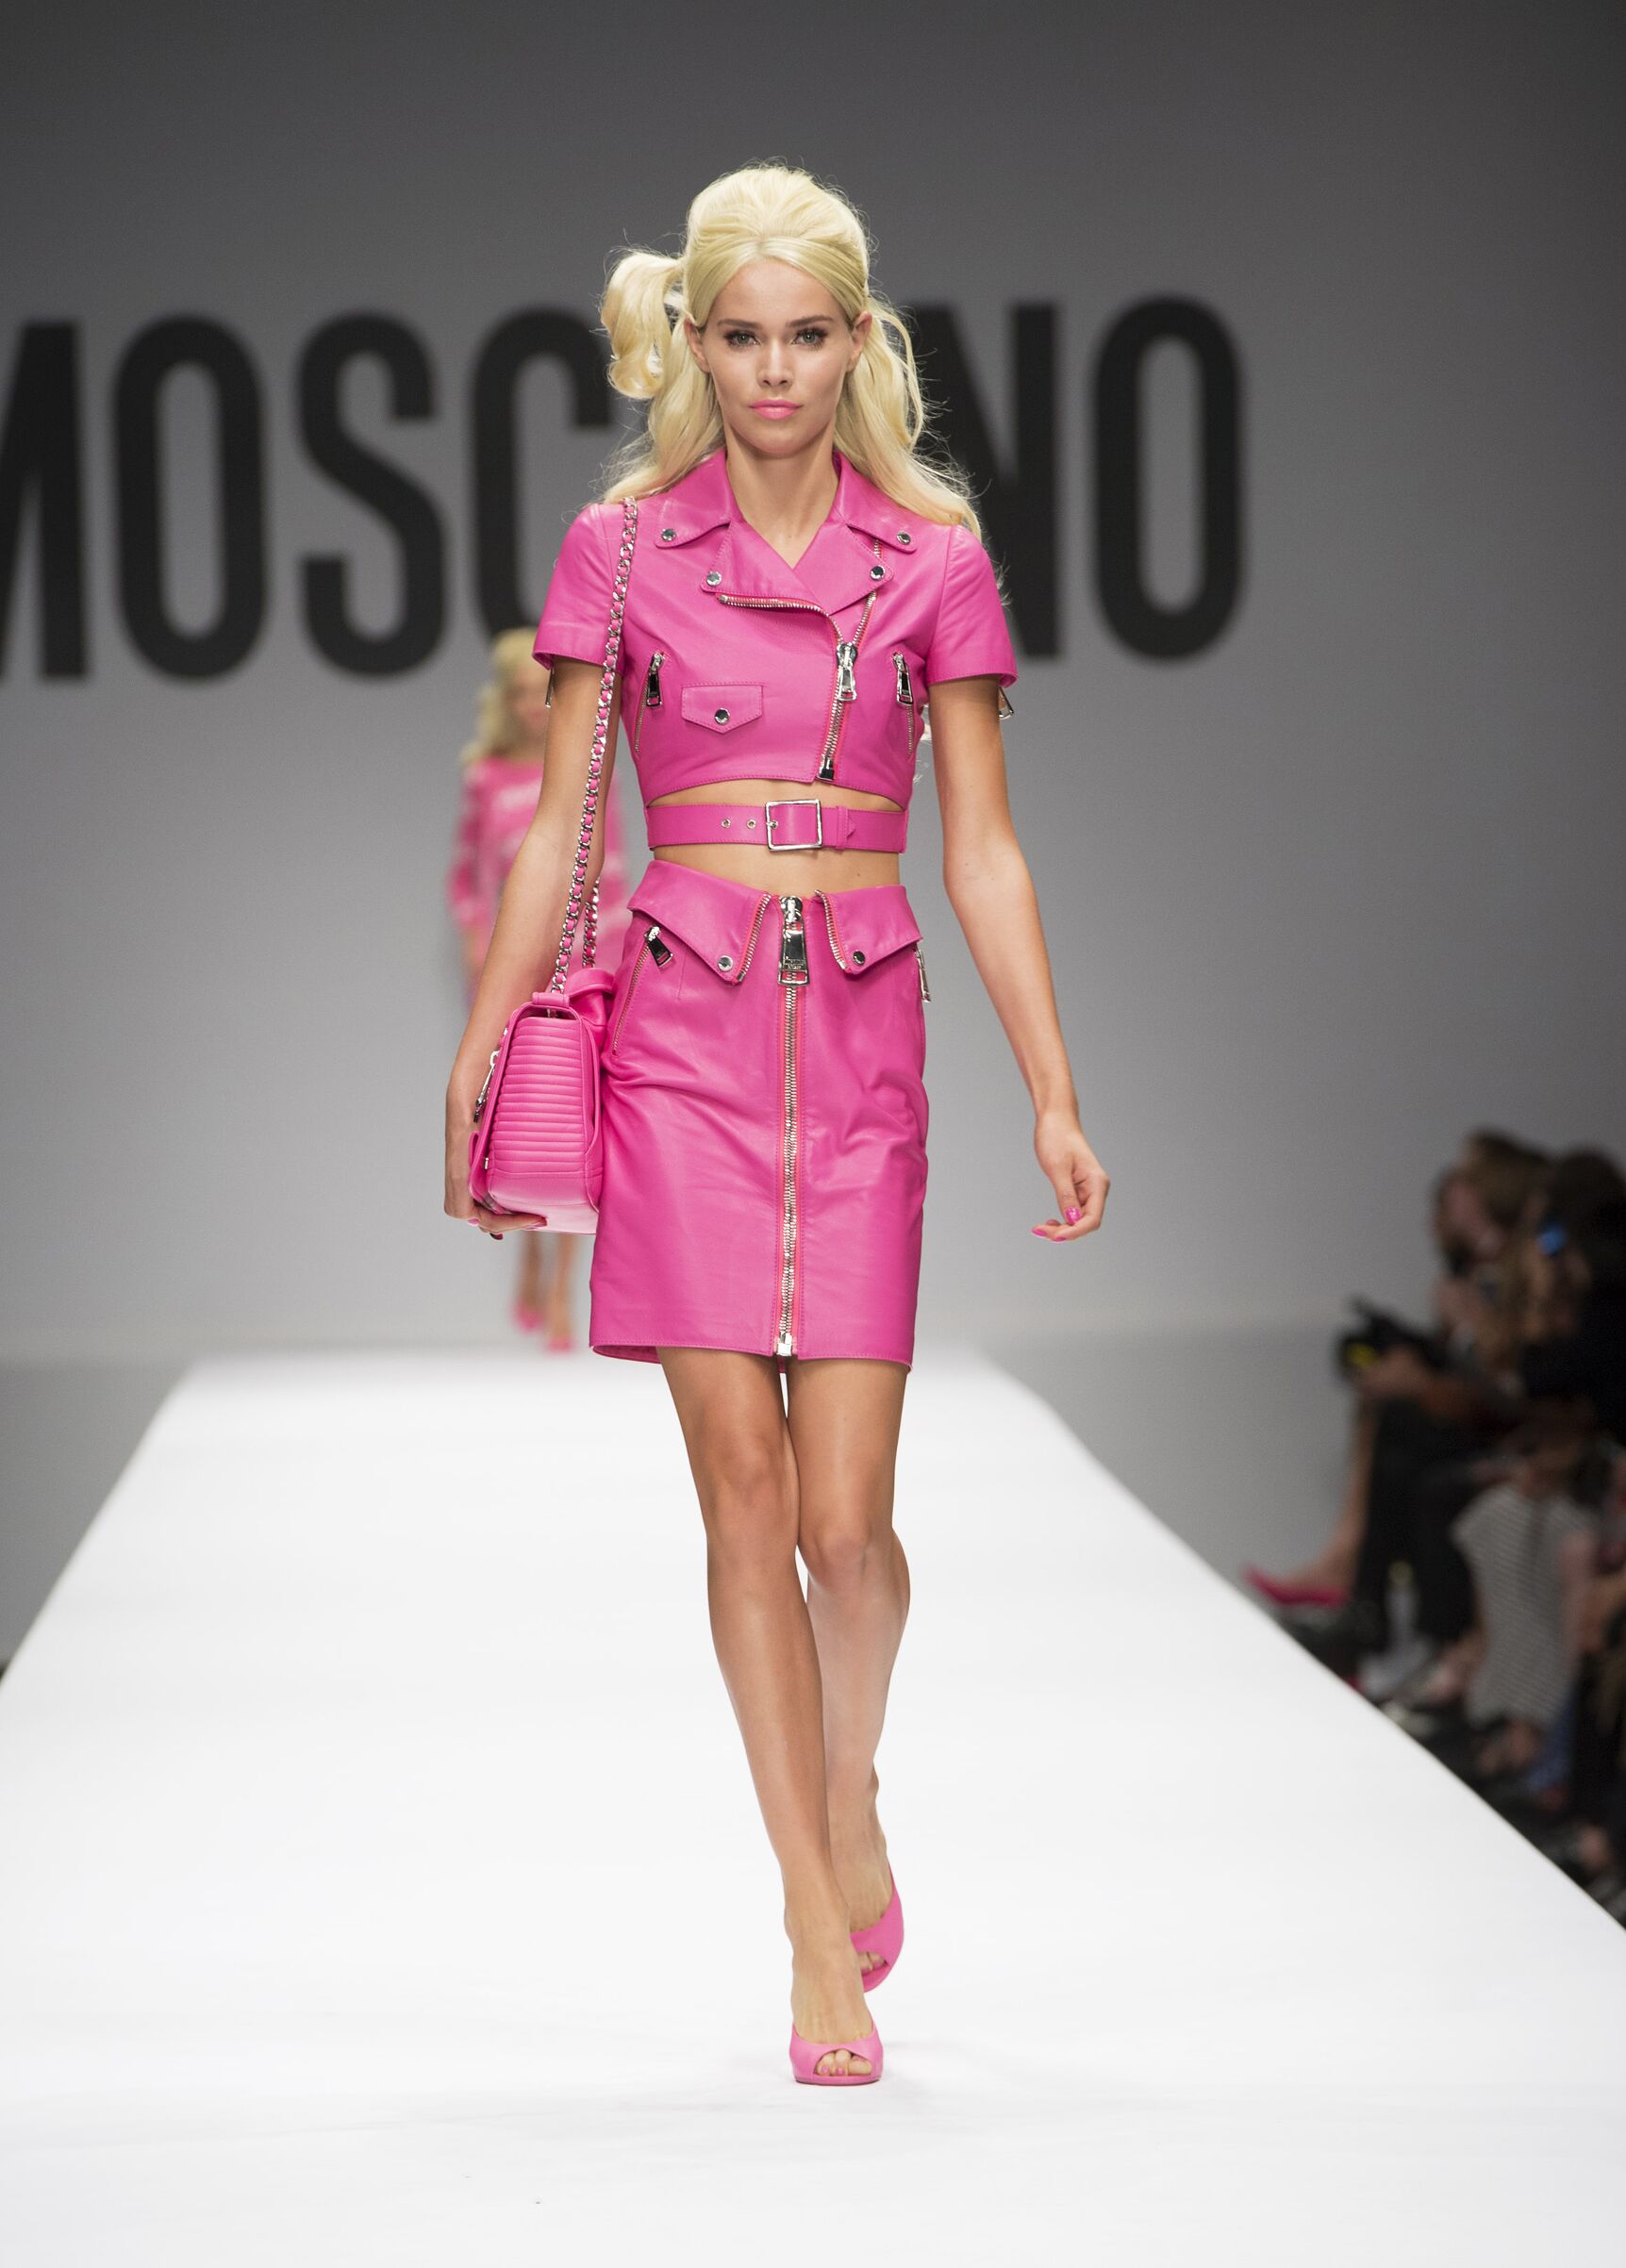 Pink Thing of The Day: Moschino Barbie!